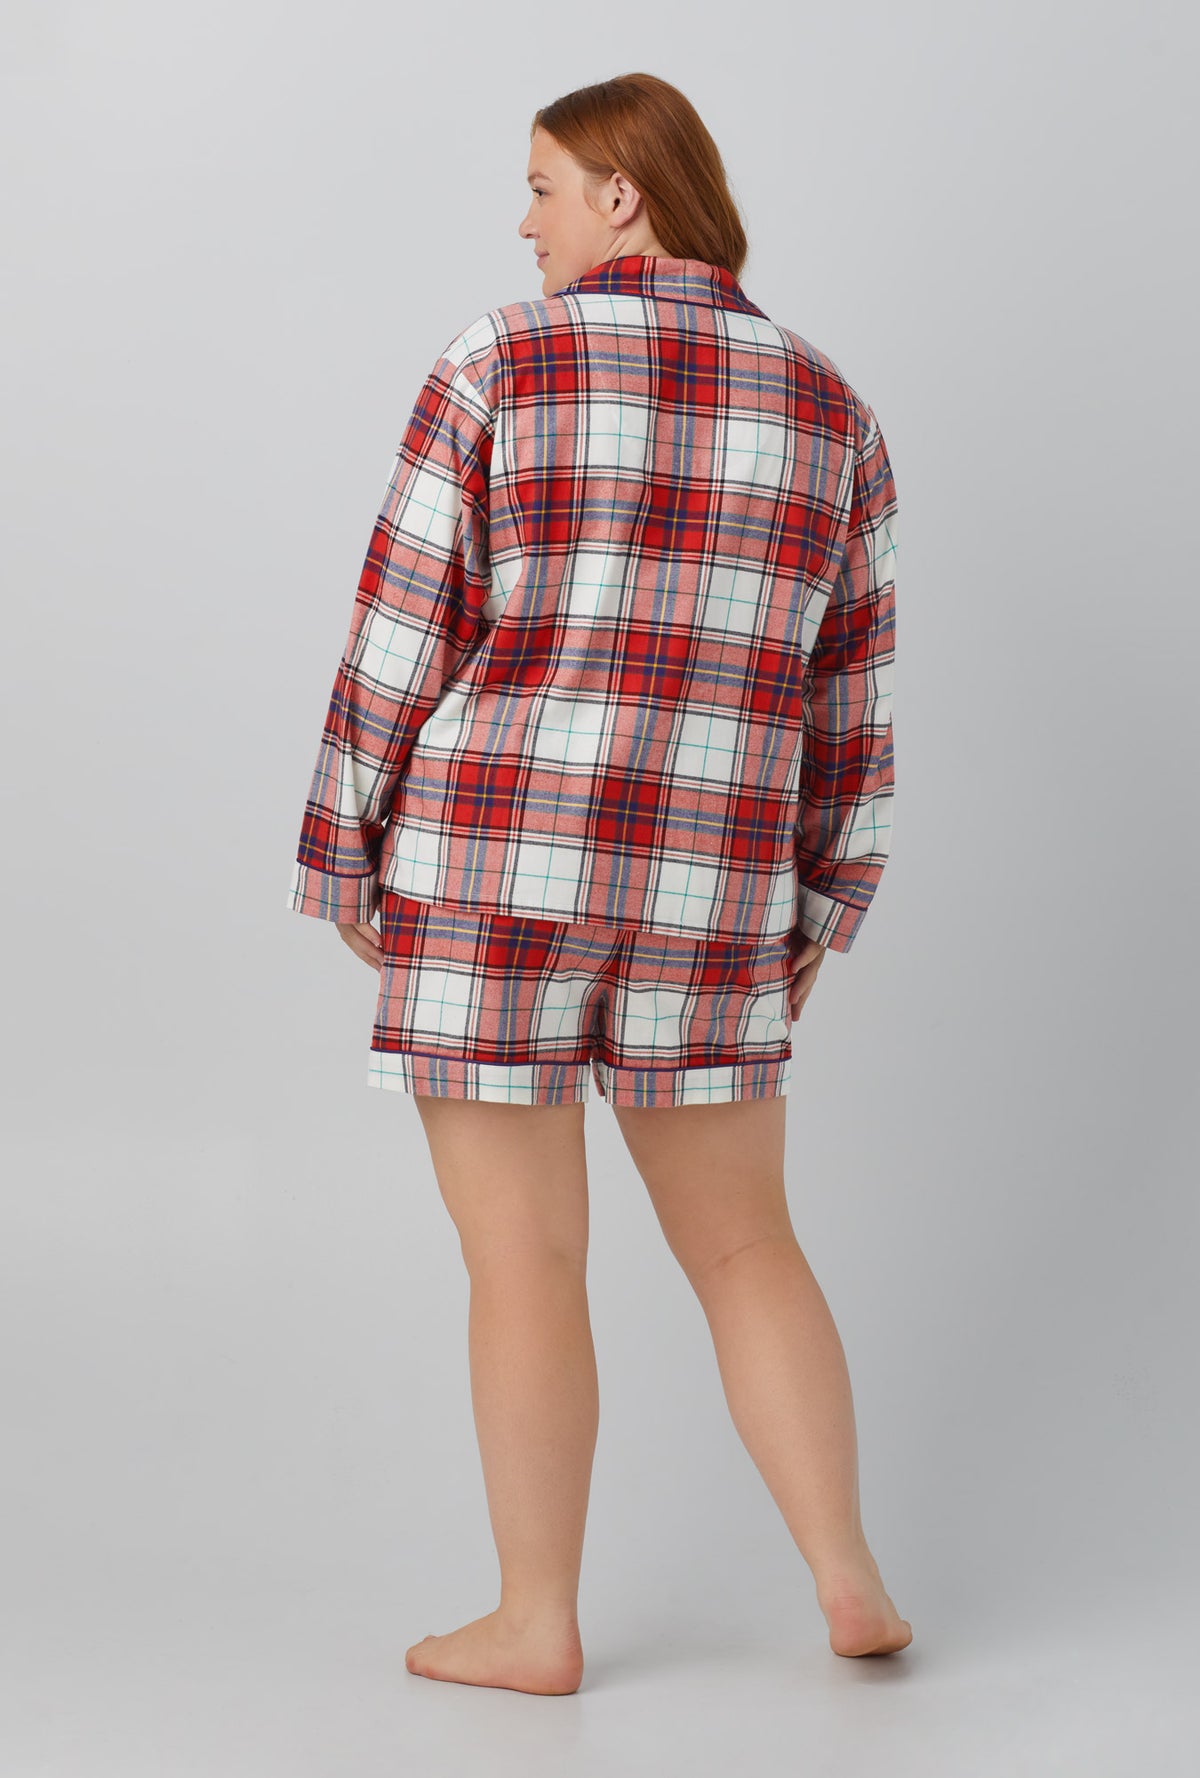 A lady wearing red Long Sleeve Classic Shorty Woven Cotton Portuguese Flannel plus PJ Set with Festive Tartan print